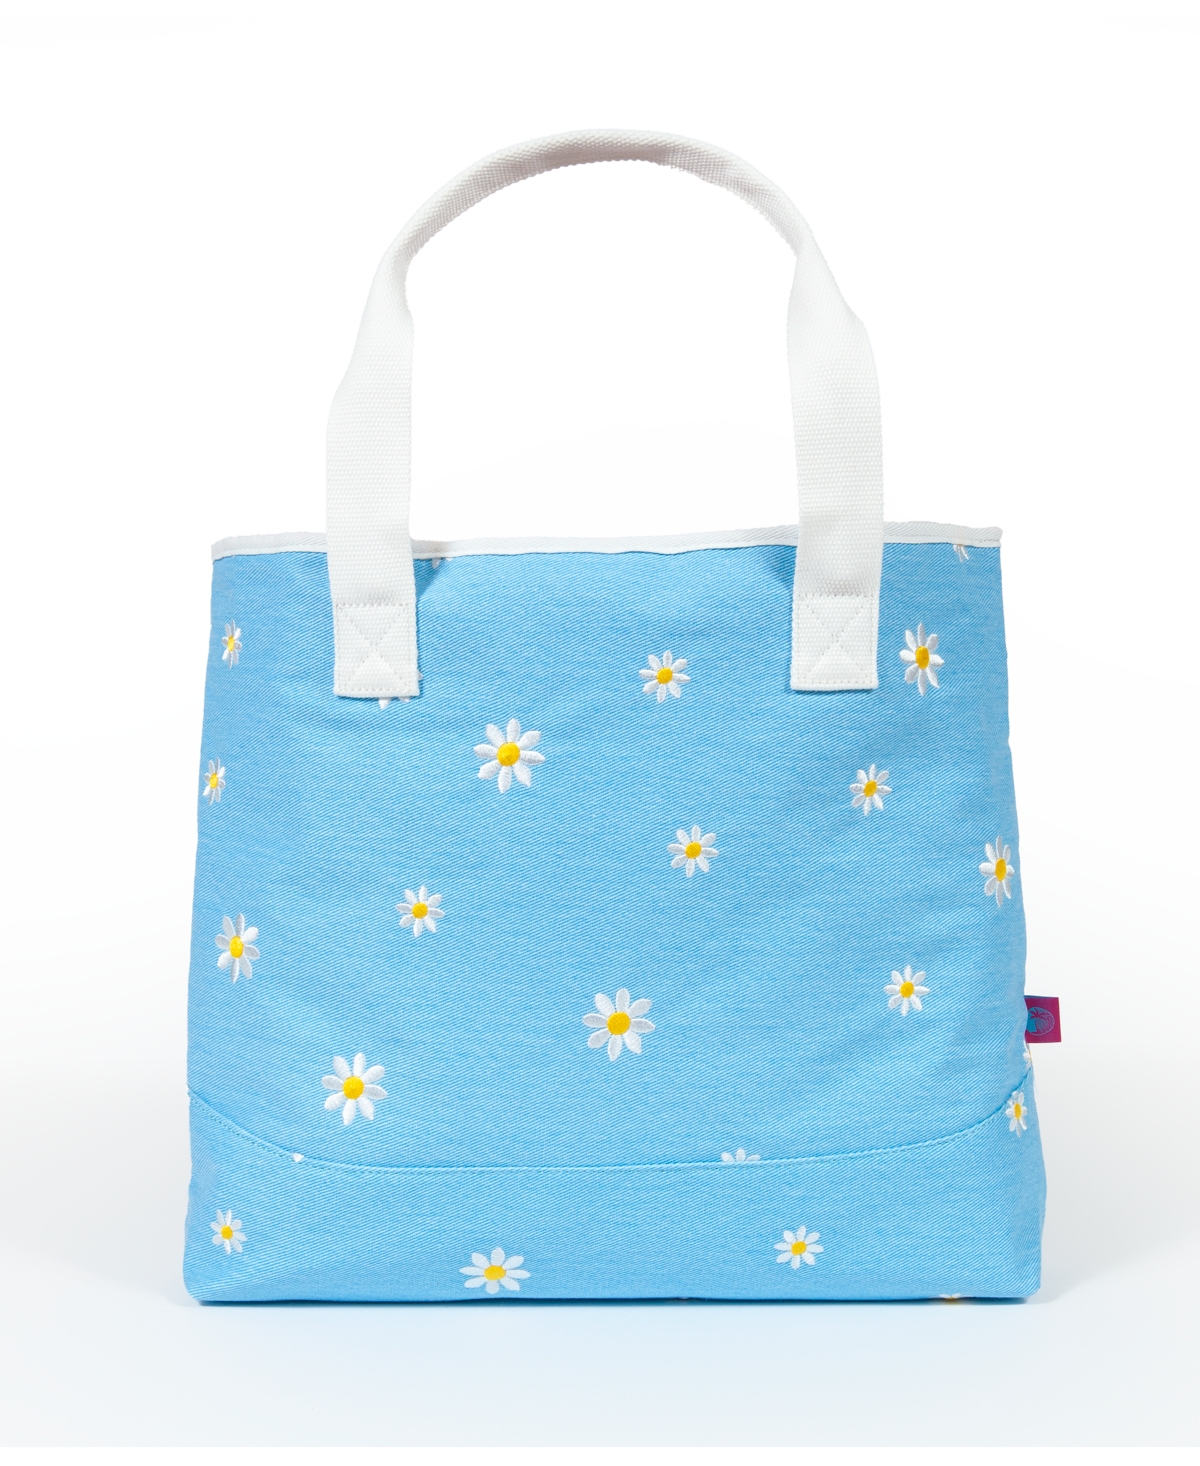 Daisy Extra Large, 100% Cotton Canvas Carryall Tote Bag - Blue